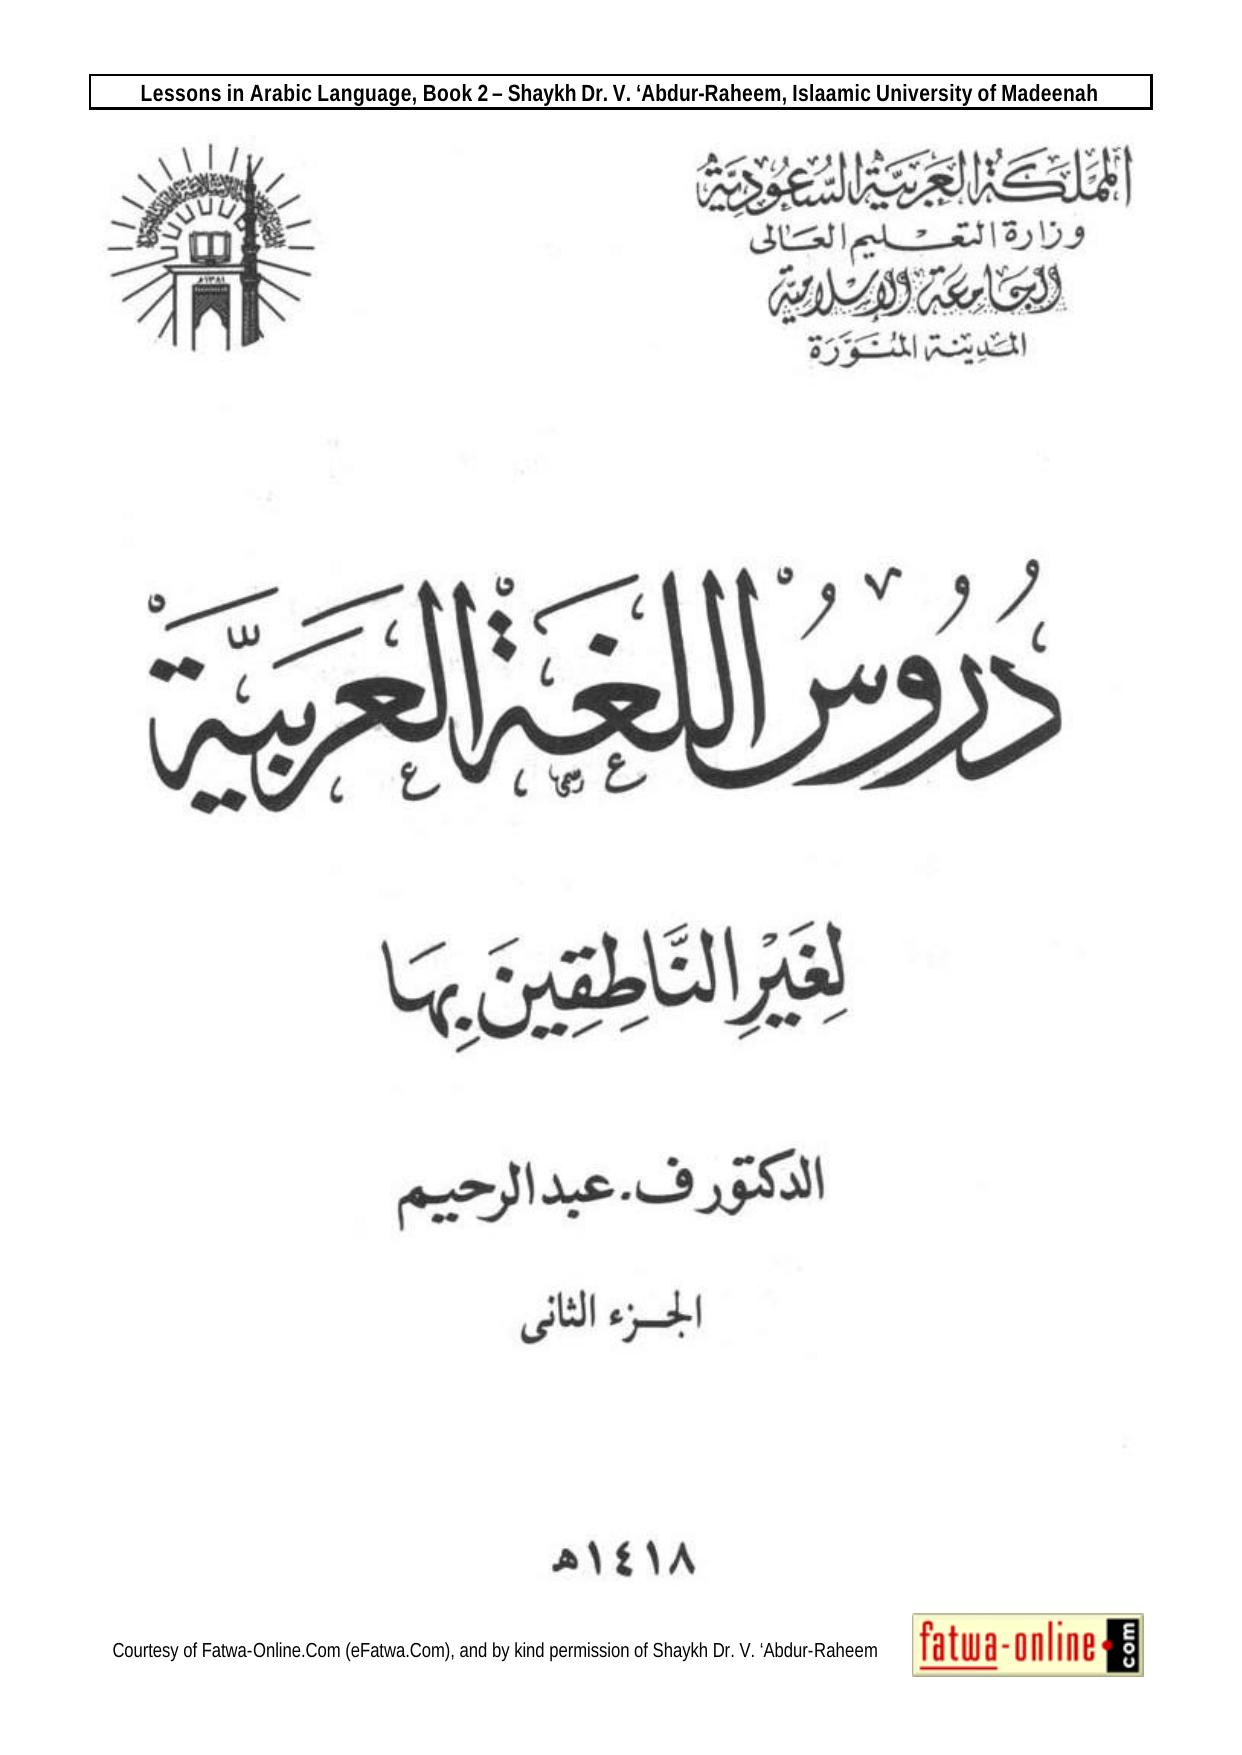 Lessons in Arabic Language, Book 2